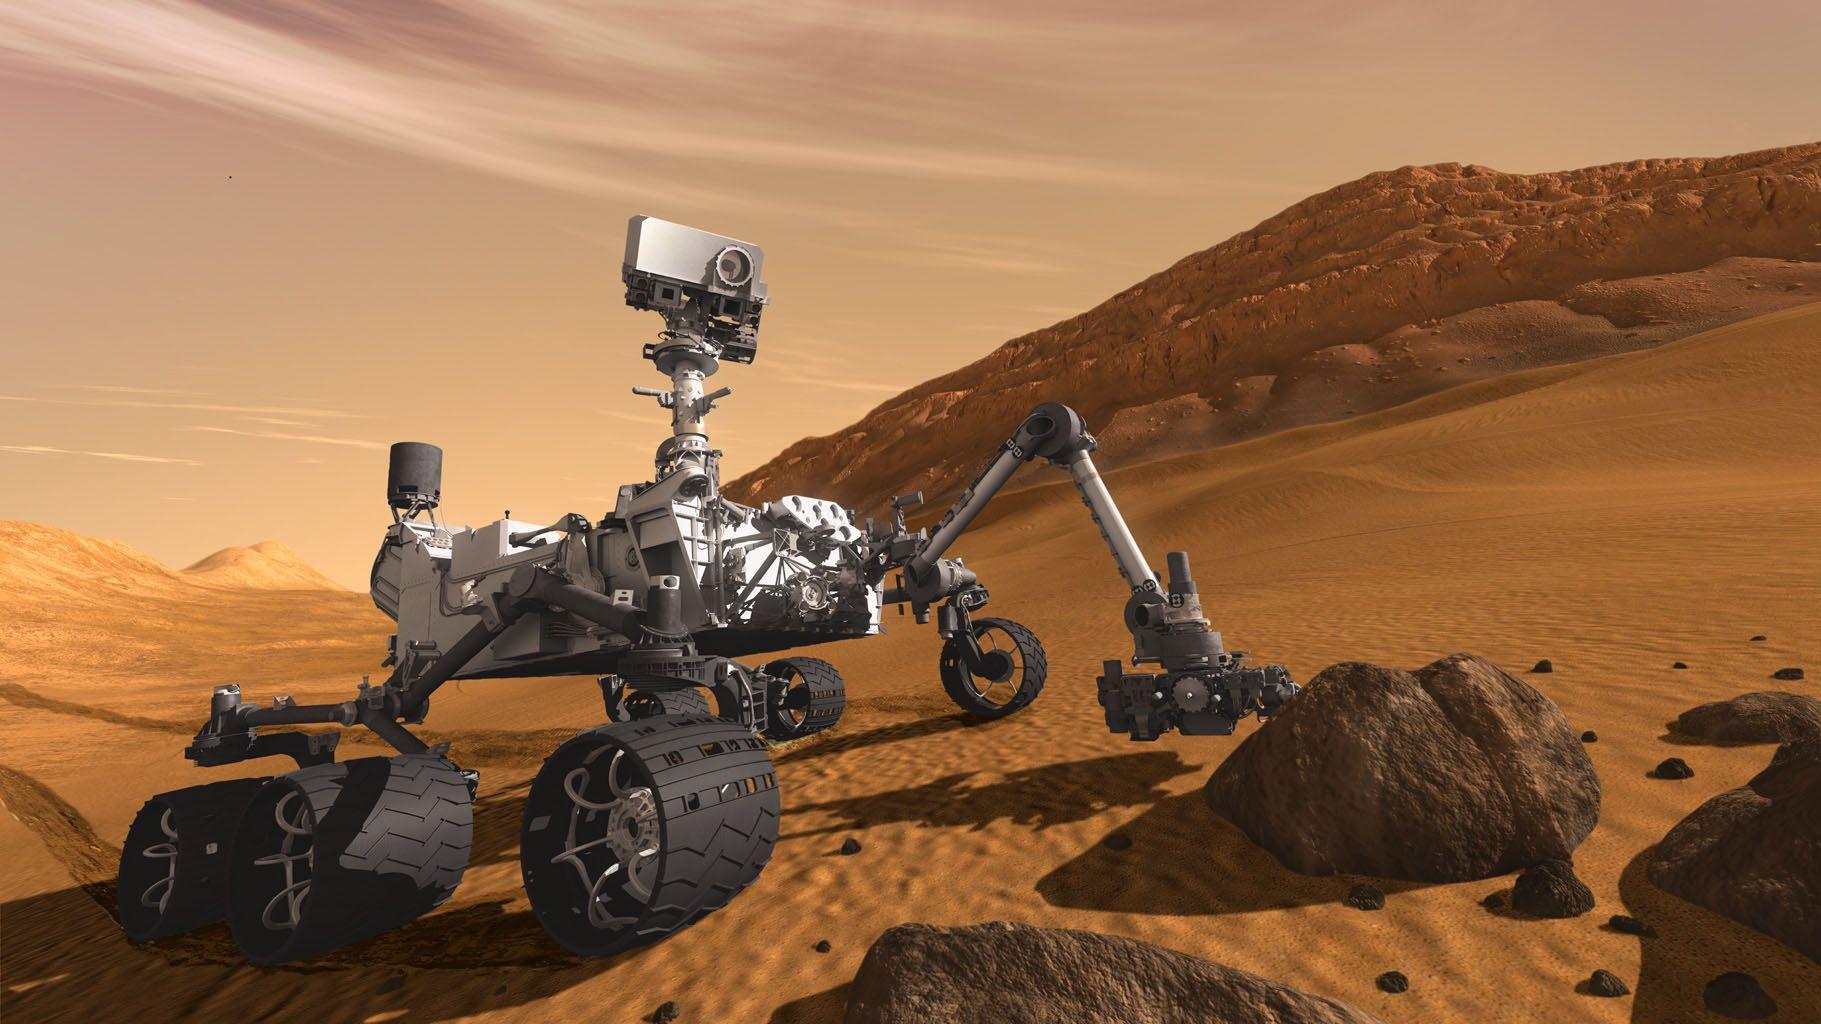 Space Image. Curiosity: The Next Mars Rover (Artist's Concept)